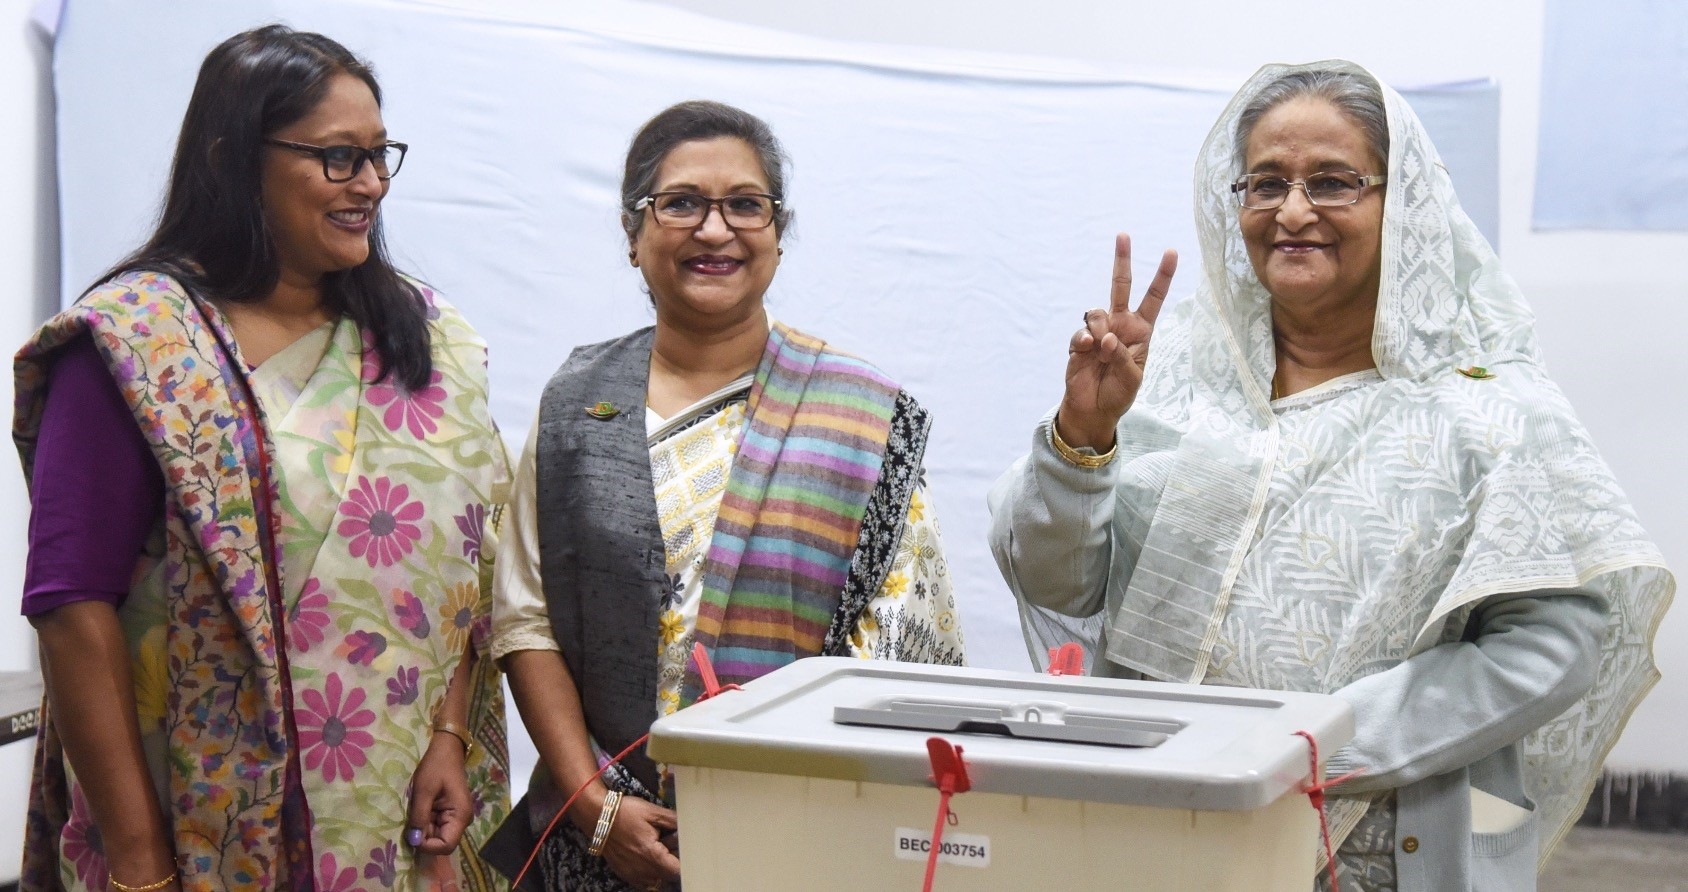 Bangladeshi Prime Minister Sheikh Hasina flashes the peace sign after casting her vote at a polling station, Dhaka, Dec. 30.